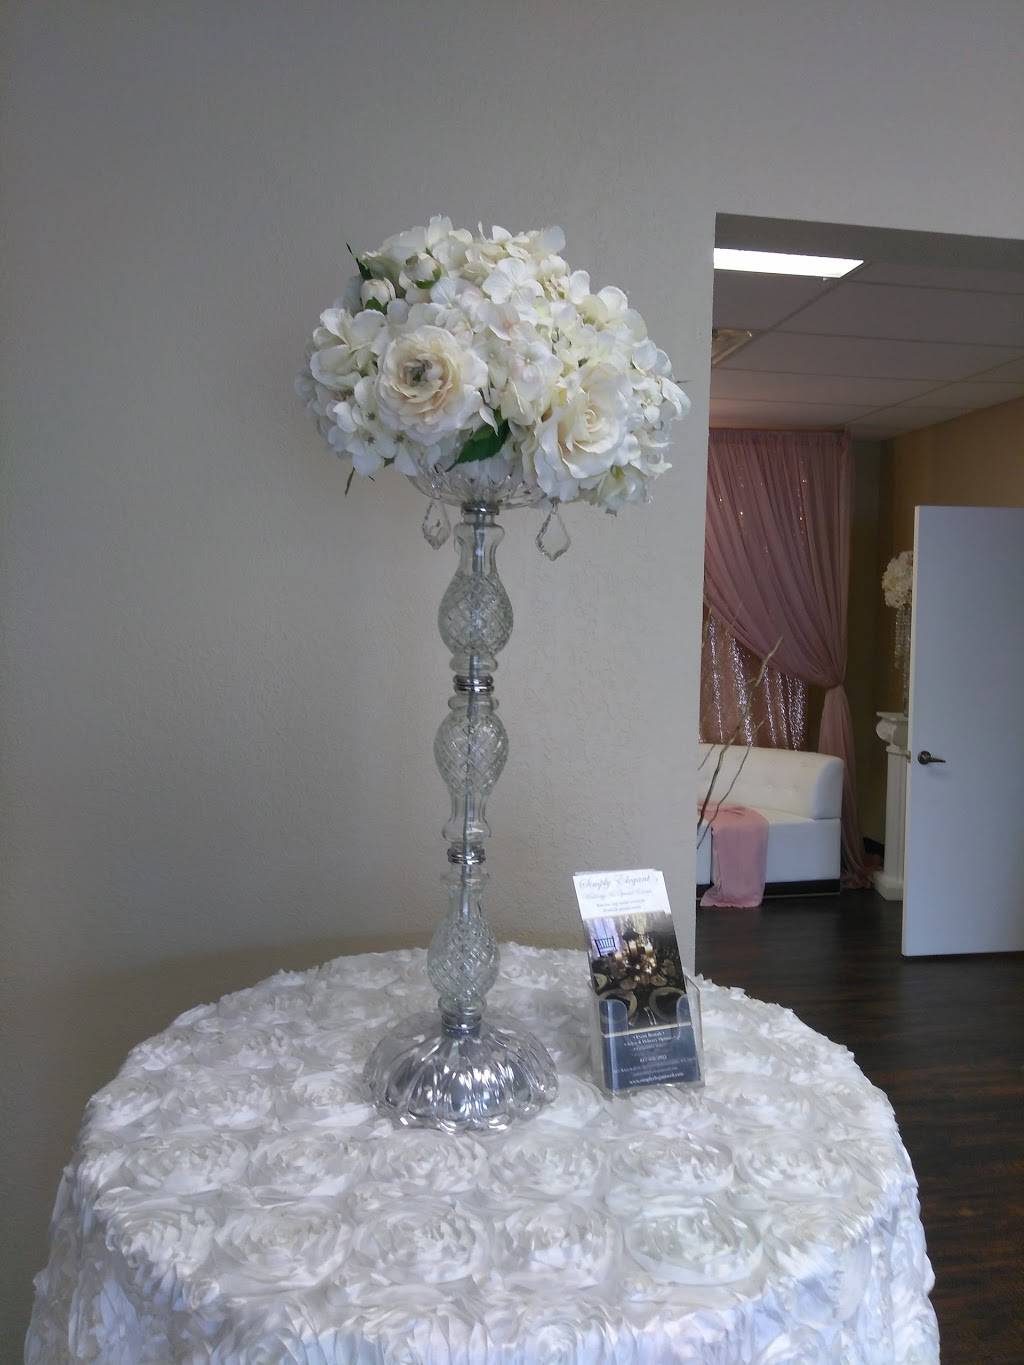 Simply Elegant Weddings & Events & Florals | 7415 Whitehall St Suite 124, Richland Hills, TX 76118, USA | Phone: (817) 656-2933